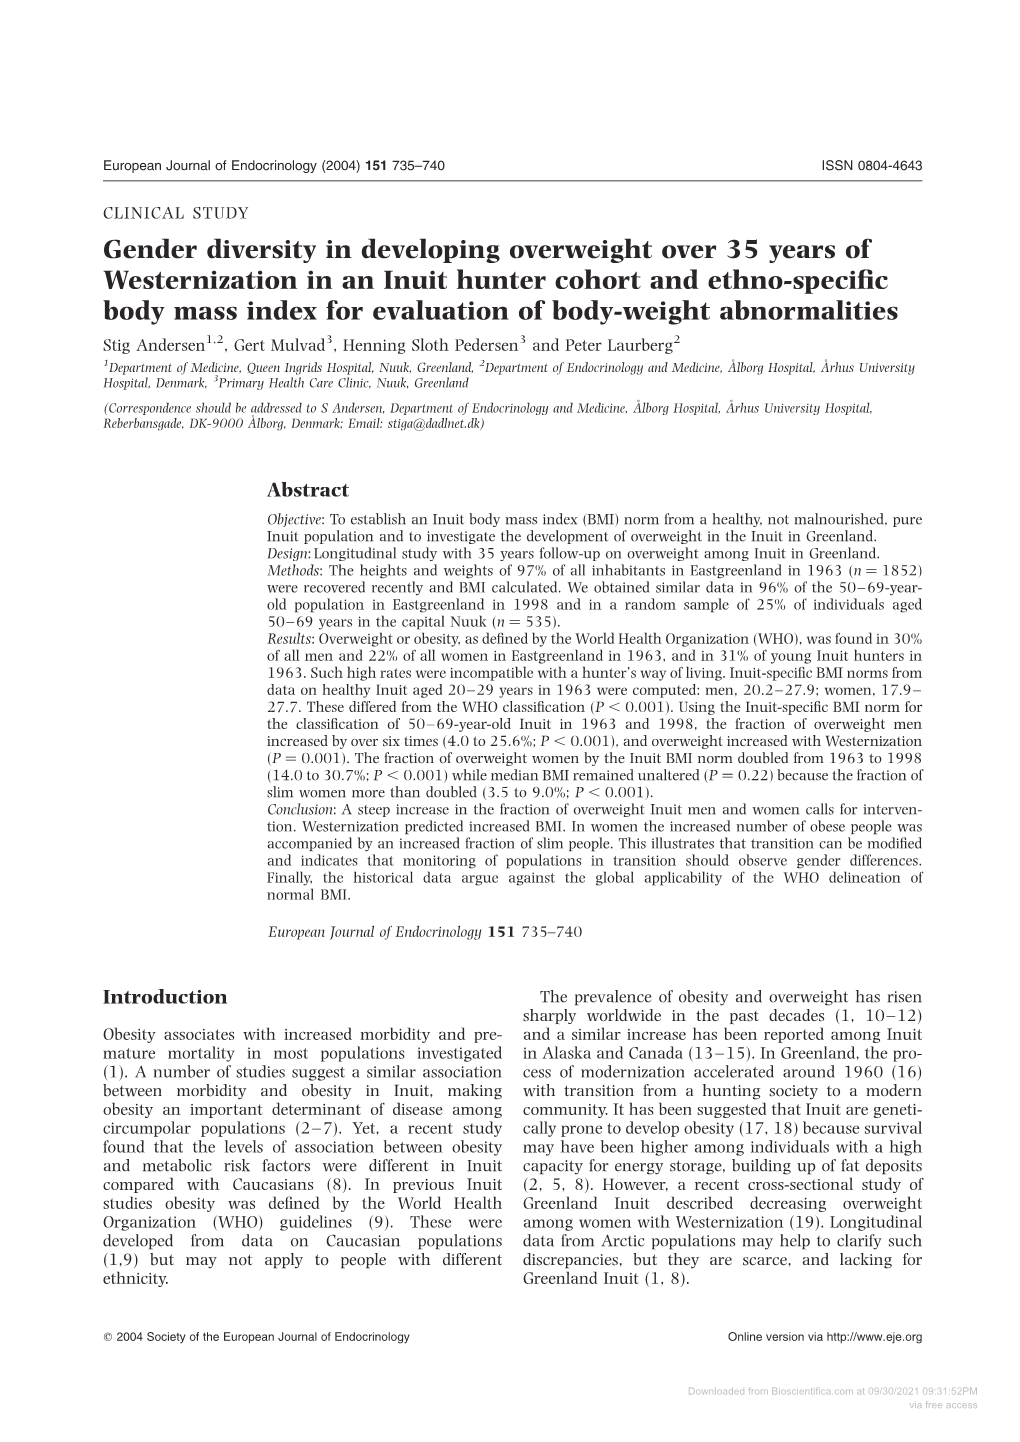 Gender Diversity in Developing Overweight Over 35 Years Of